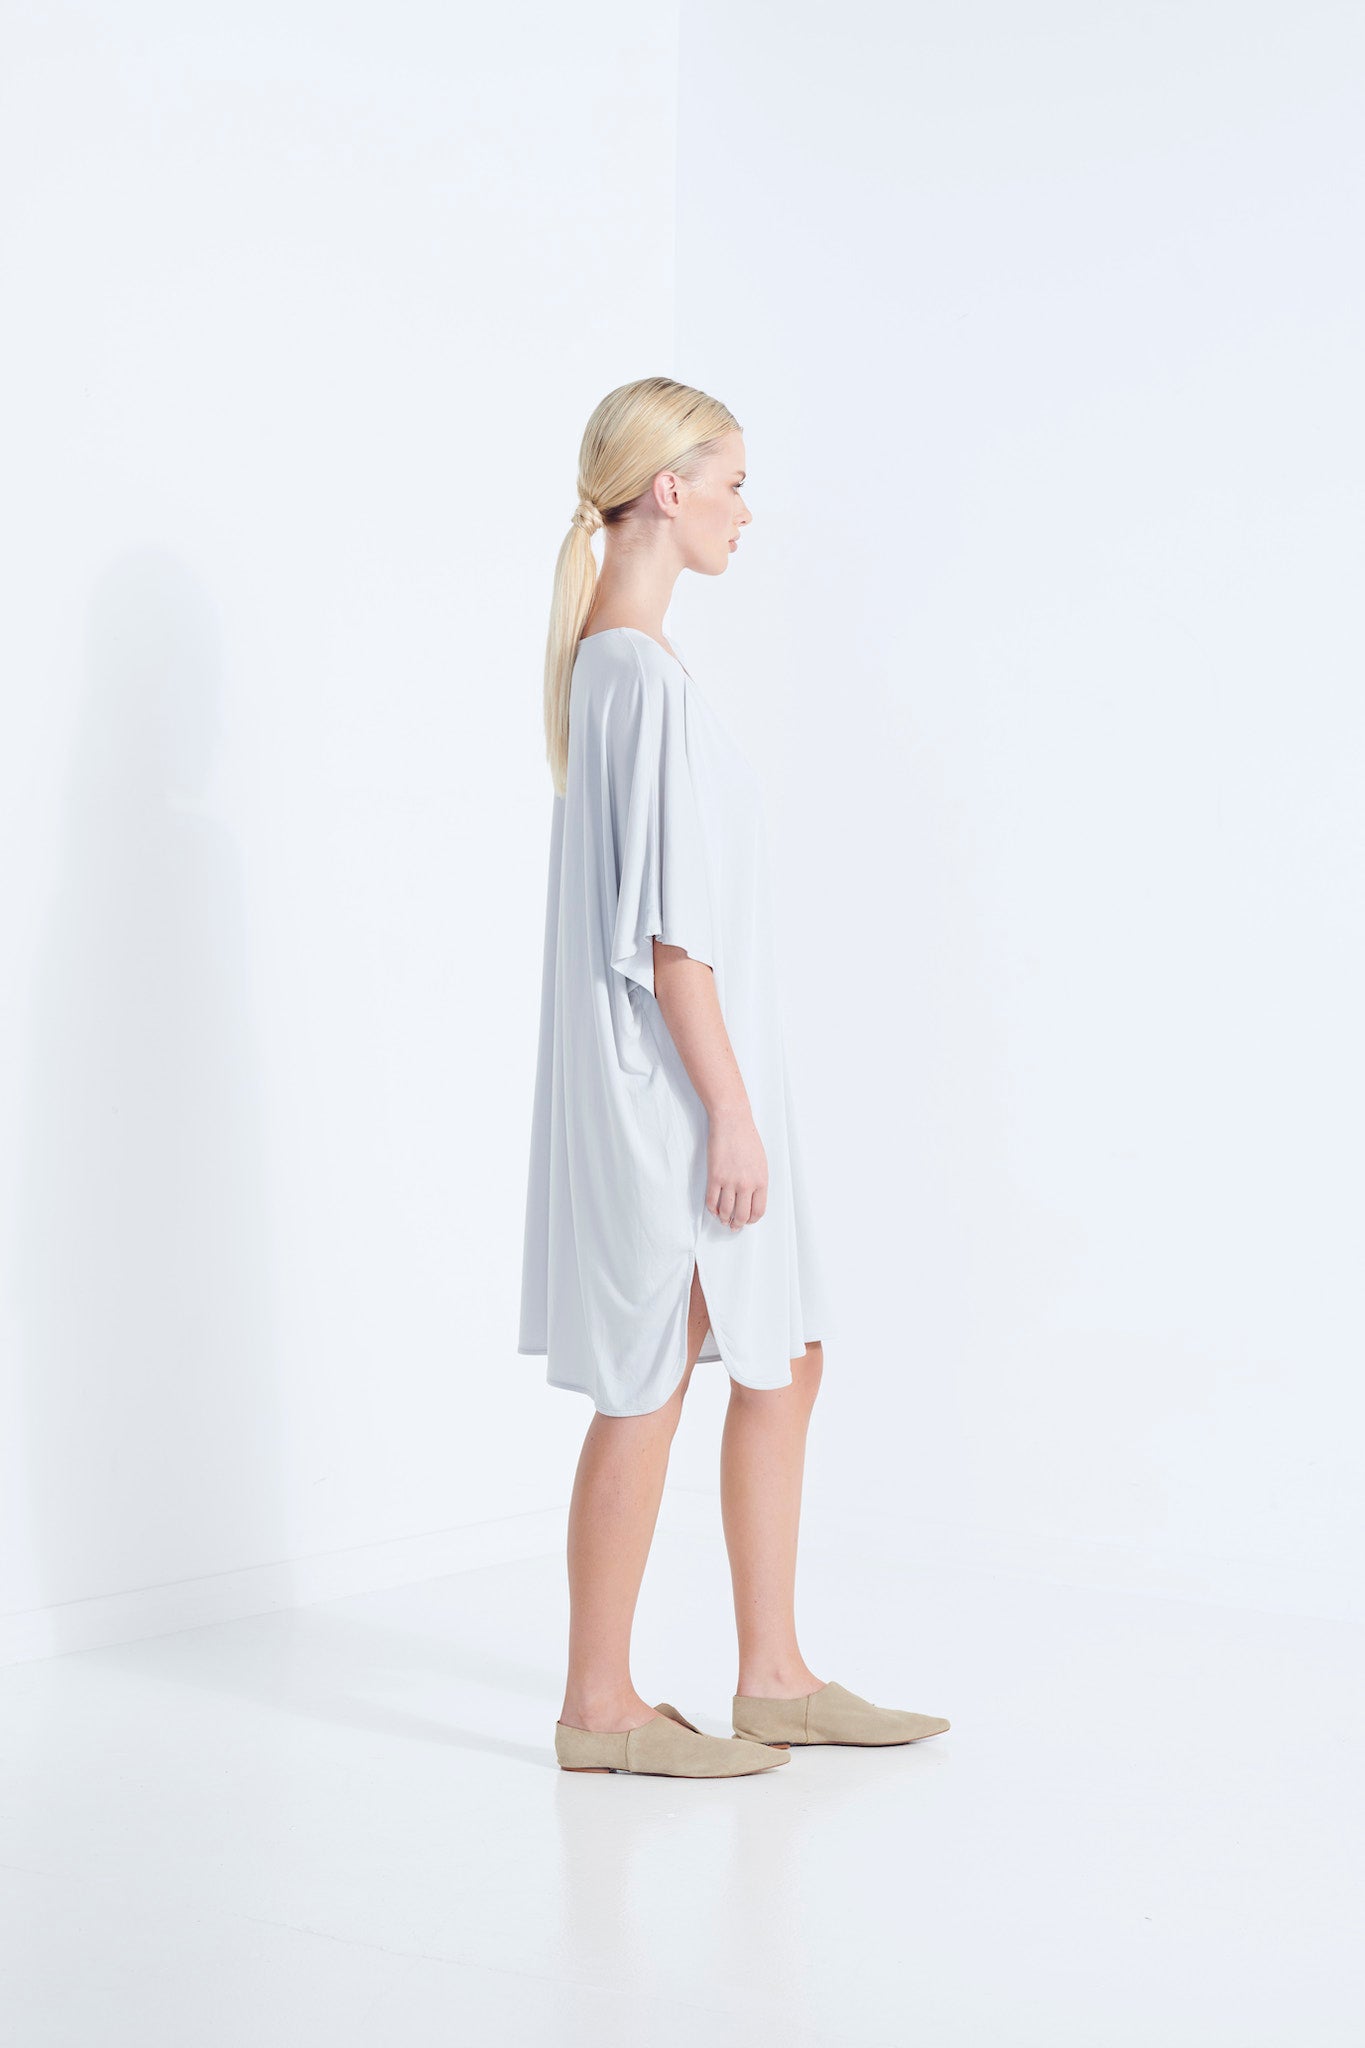 THEMIS DRESS LONGLINE T-SHIRT BEECHWOOD MODAL STRETCH WITH REMOVABLE TIE WISP PALE WASHED GREY  SIDE VIEW 